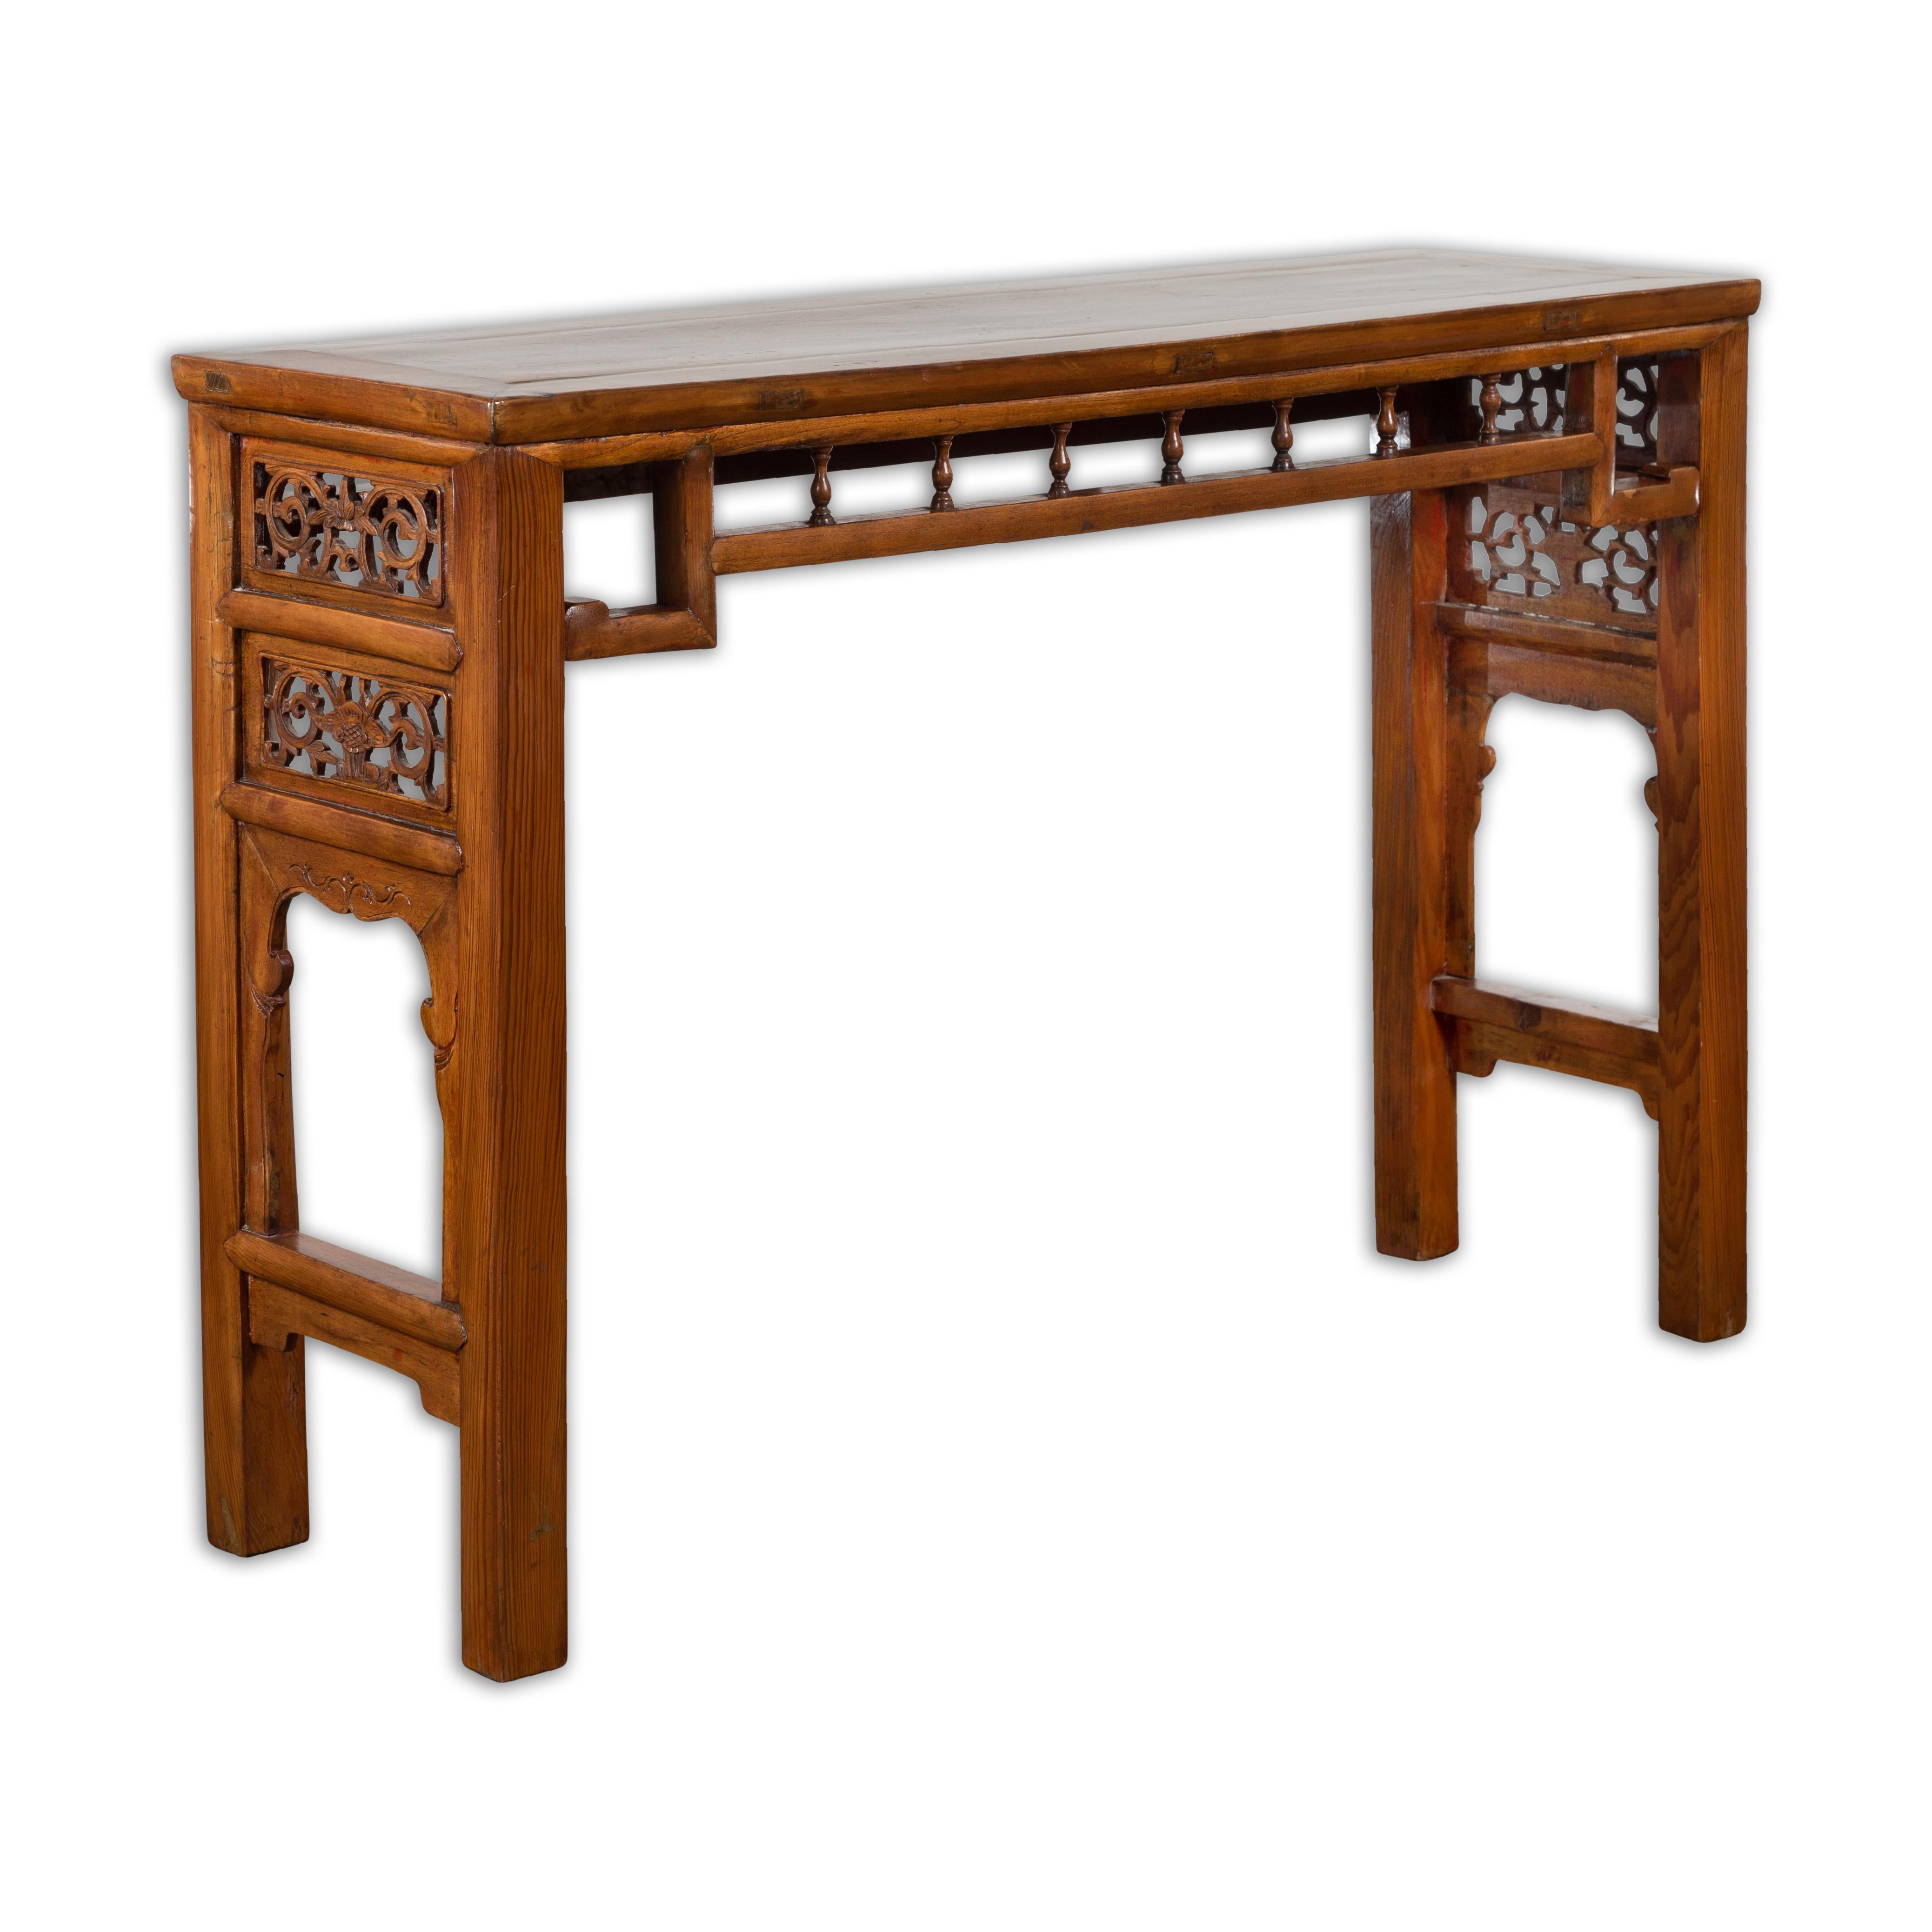 Chinese Late Qing Dynasty Altar Console Table with Foliage Carved Apron For Sale 15